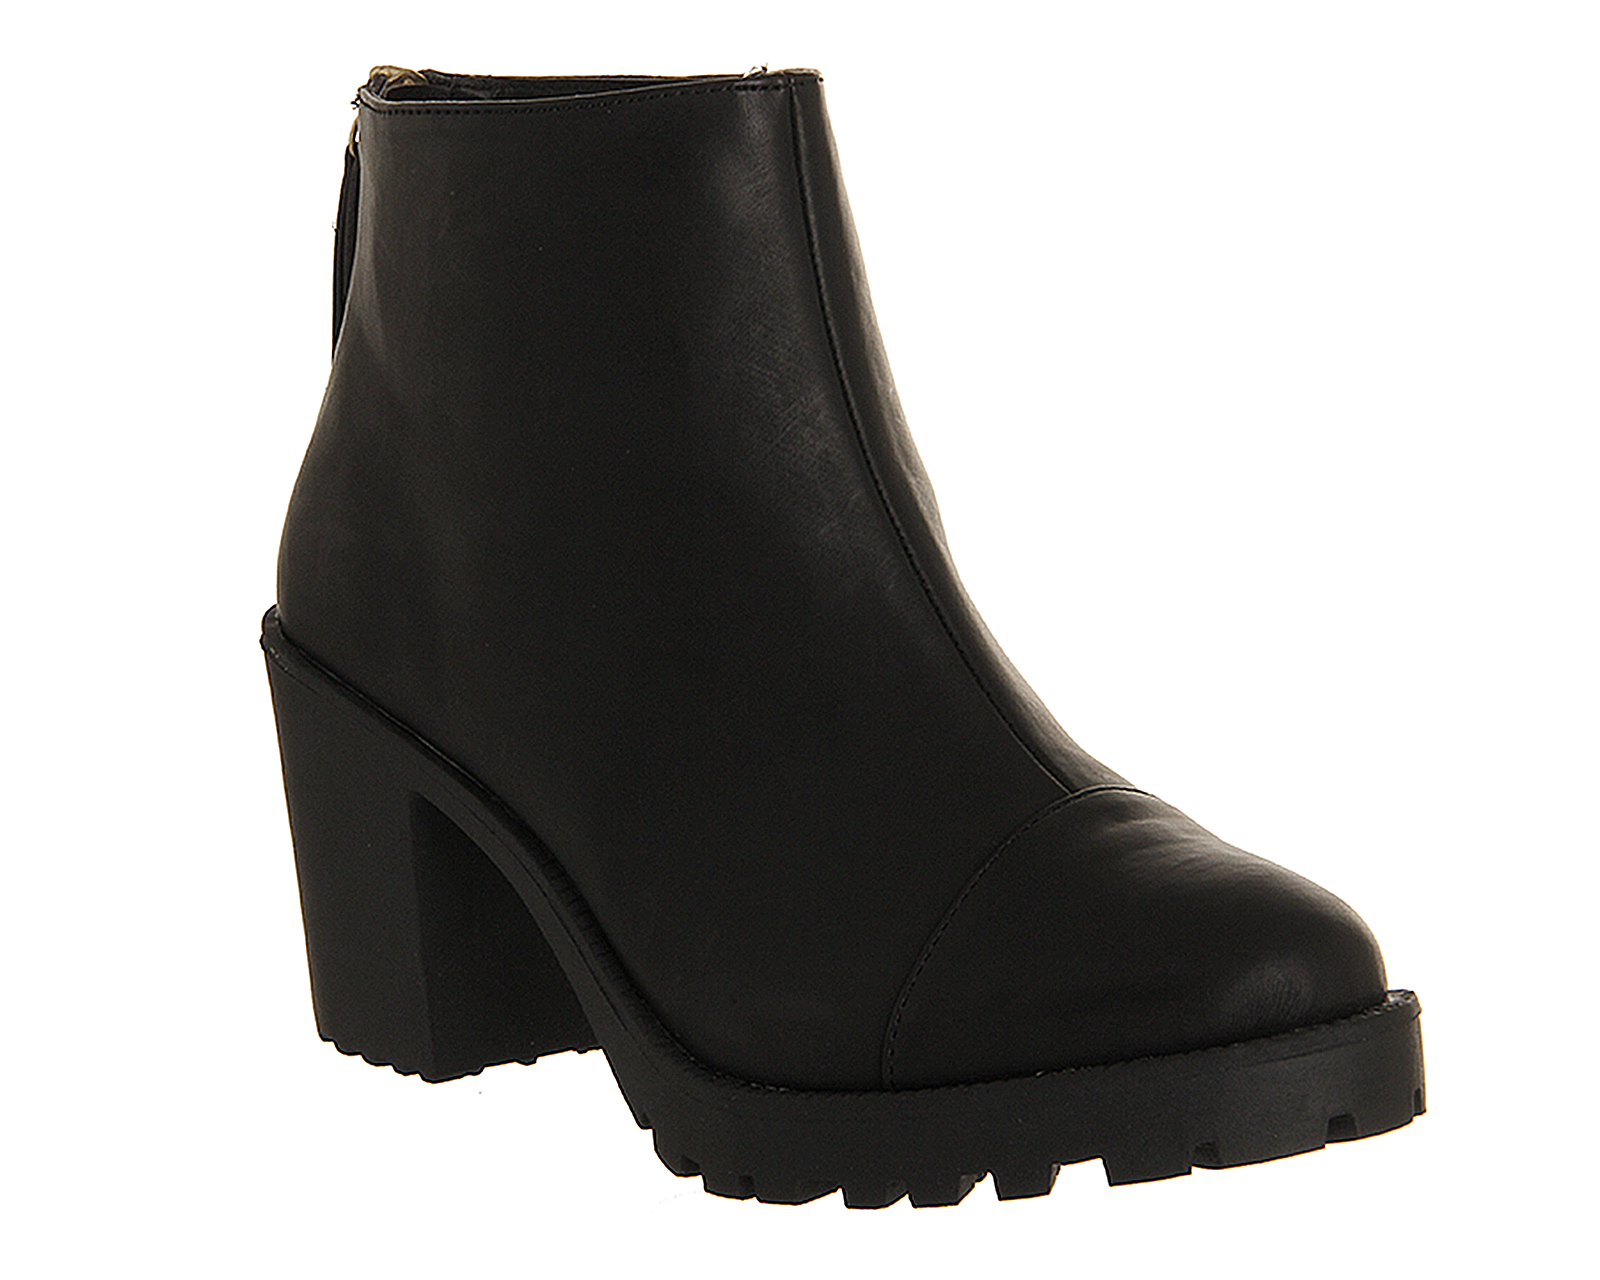 OFFICE Connie Back Zip boots Black - Women's Ankle Boots